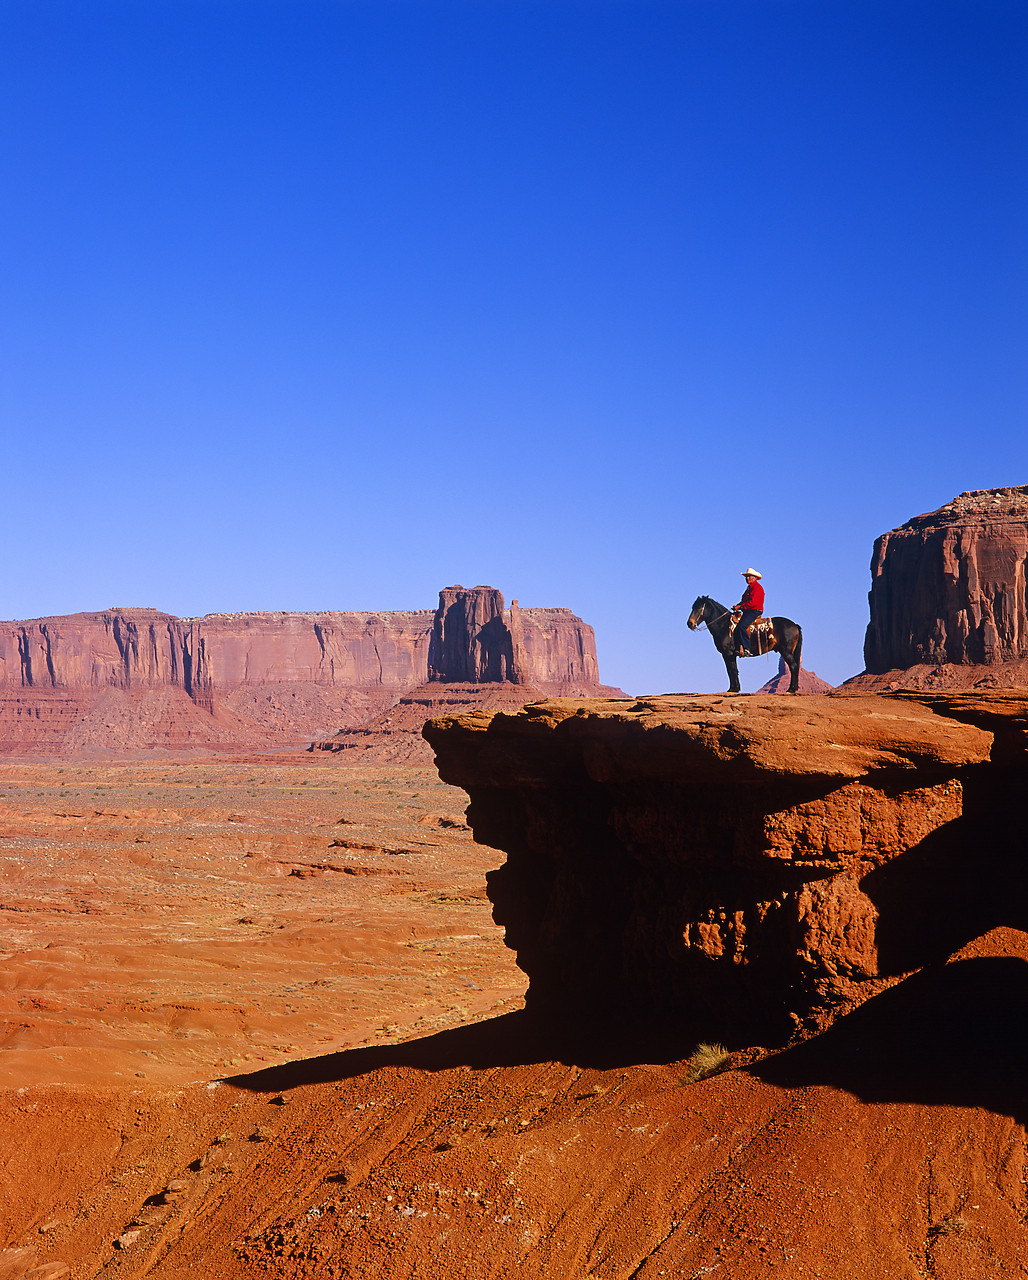 #010714-2 - View From John Ford Point, Monument Valley, Arizona, USA